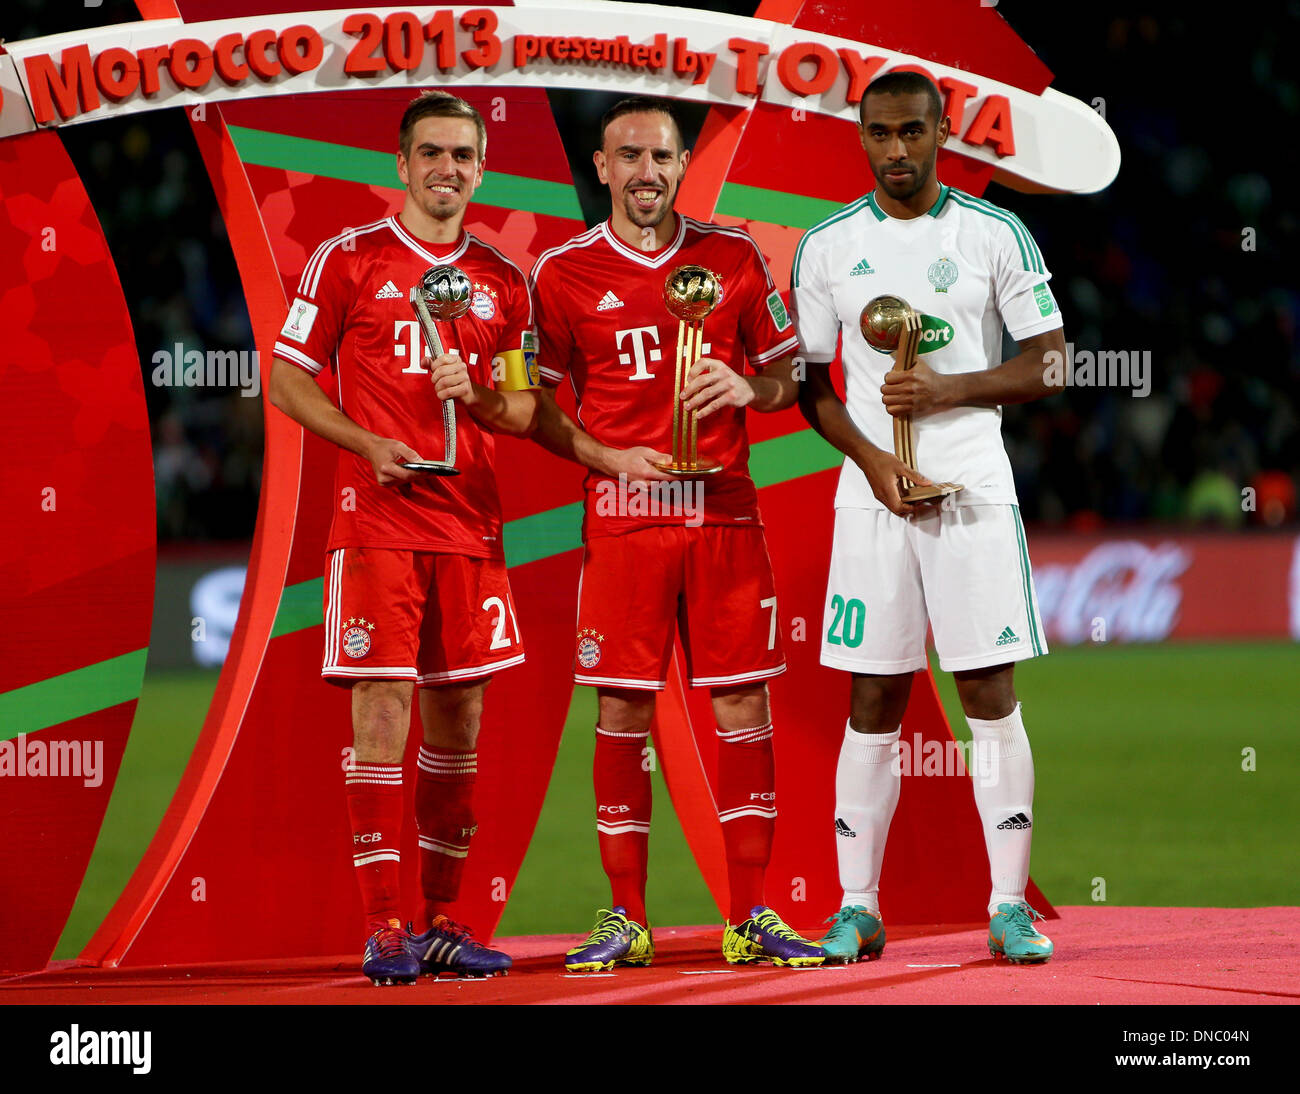 Marrakech , Morocco. 21st Dec, 2013. Phillip LAHM (L) Frank RIBERY (M) Mouhssine IAJOUR (R) celebrate winning their trophies after the FIFA Club World Cup Final game between Bayern Munich and Raja Casablanca from the Marrakech Stadium. Credit:  Action Plus Sports/Alamy Live News Stock Photo